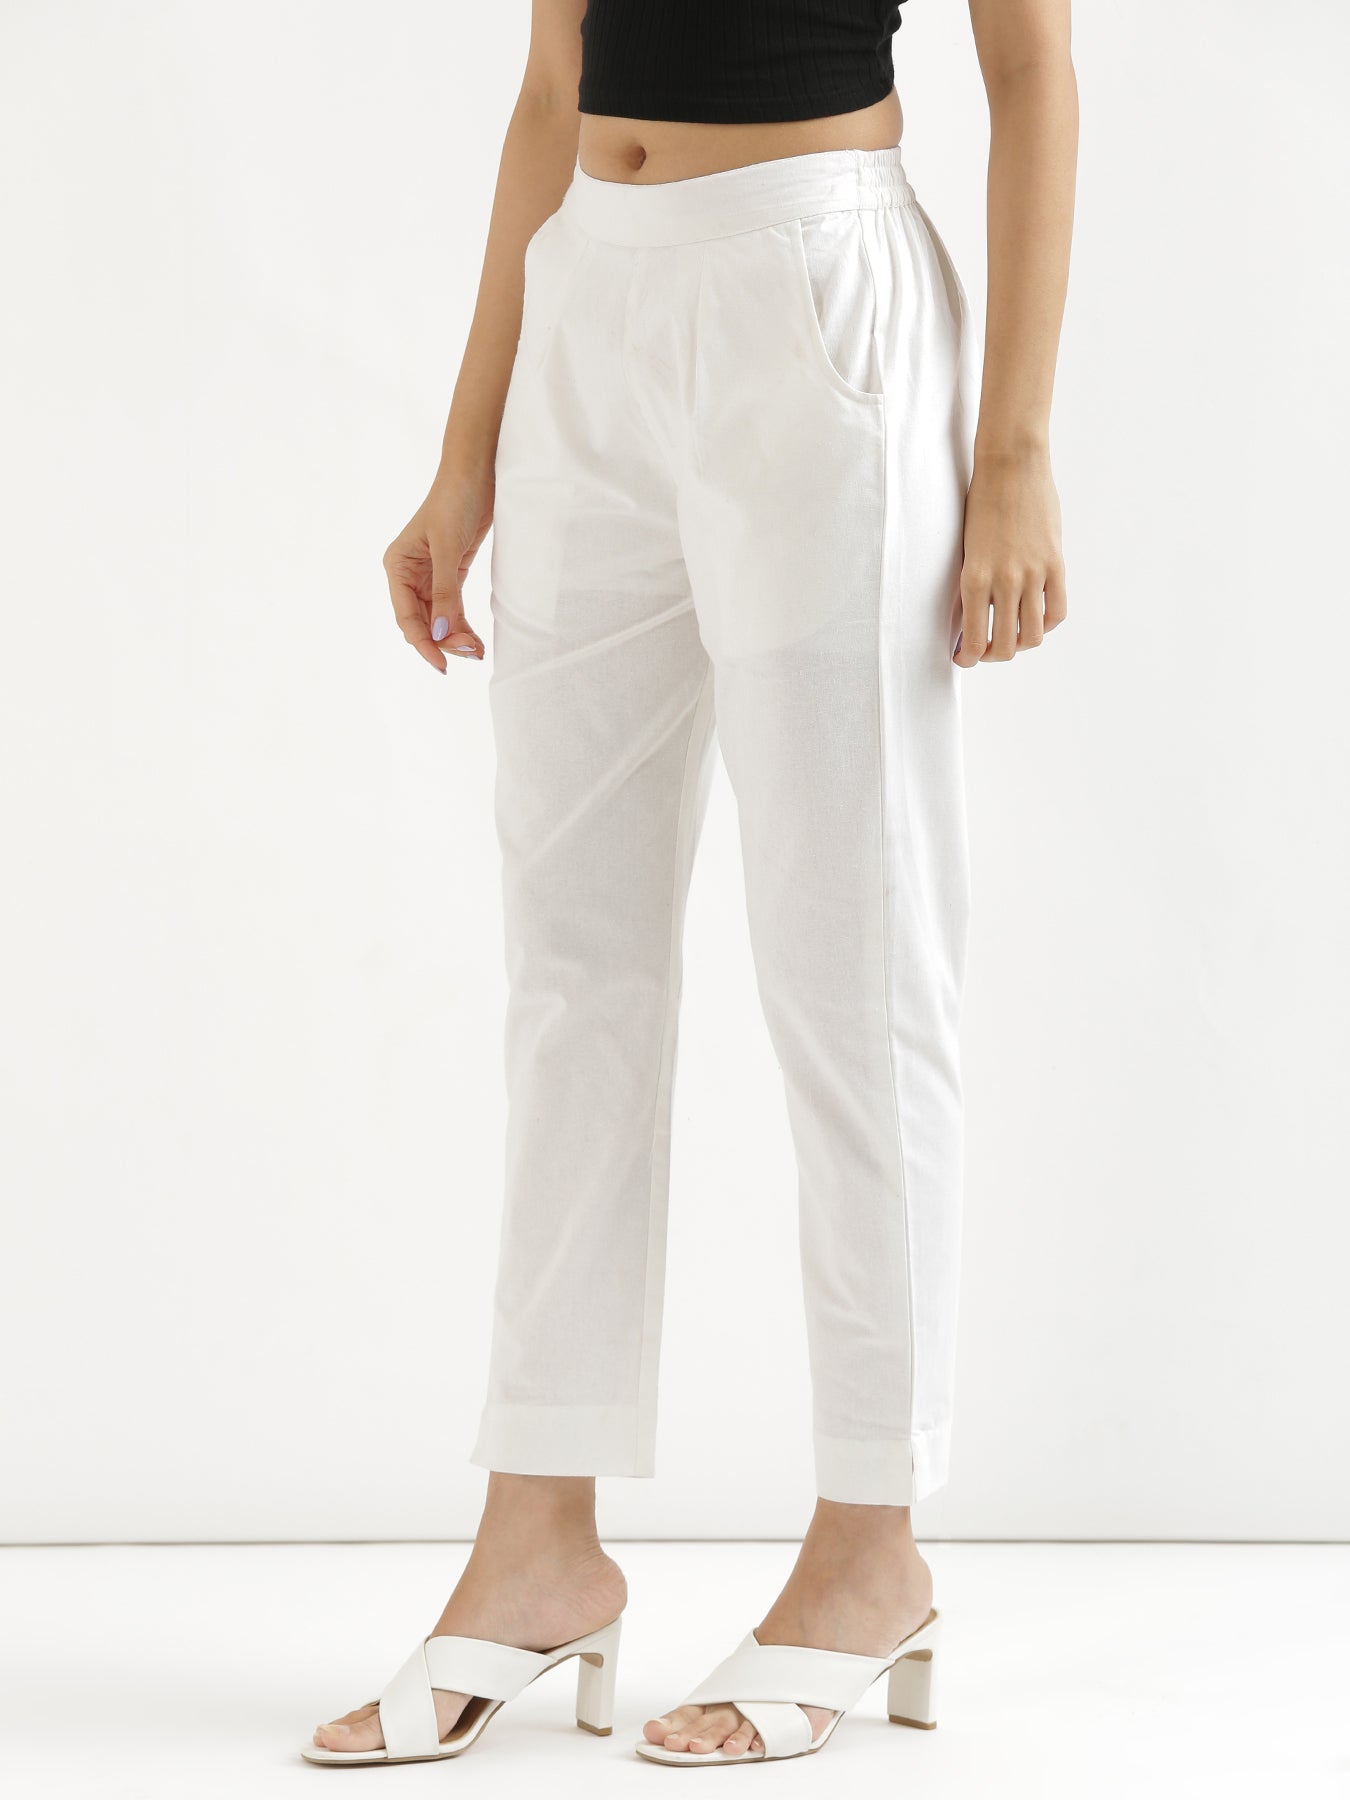 Buy White Trousers & Pants for Women by Kassually Online | Ajio.com